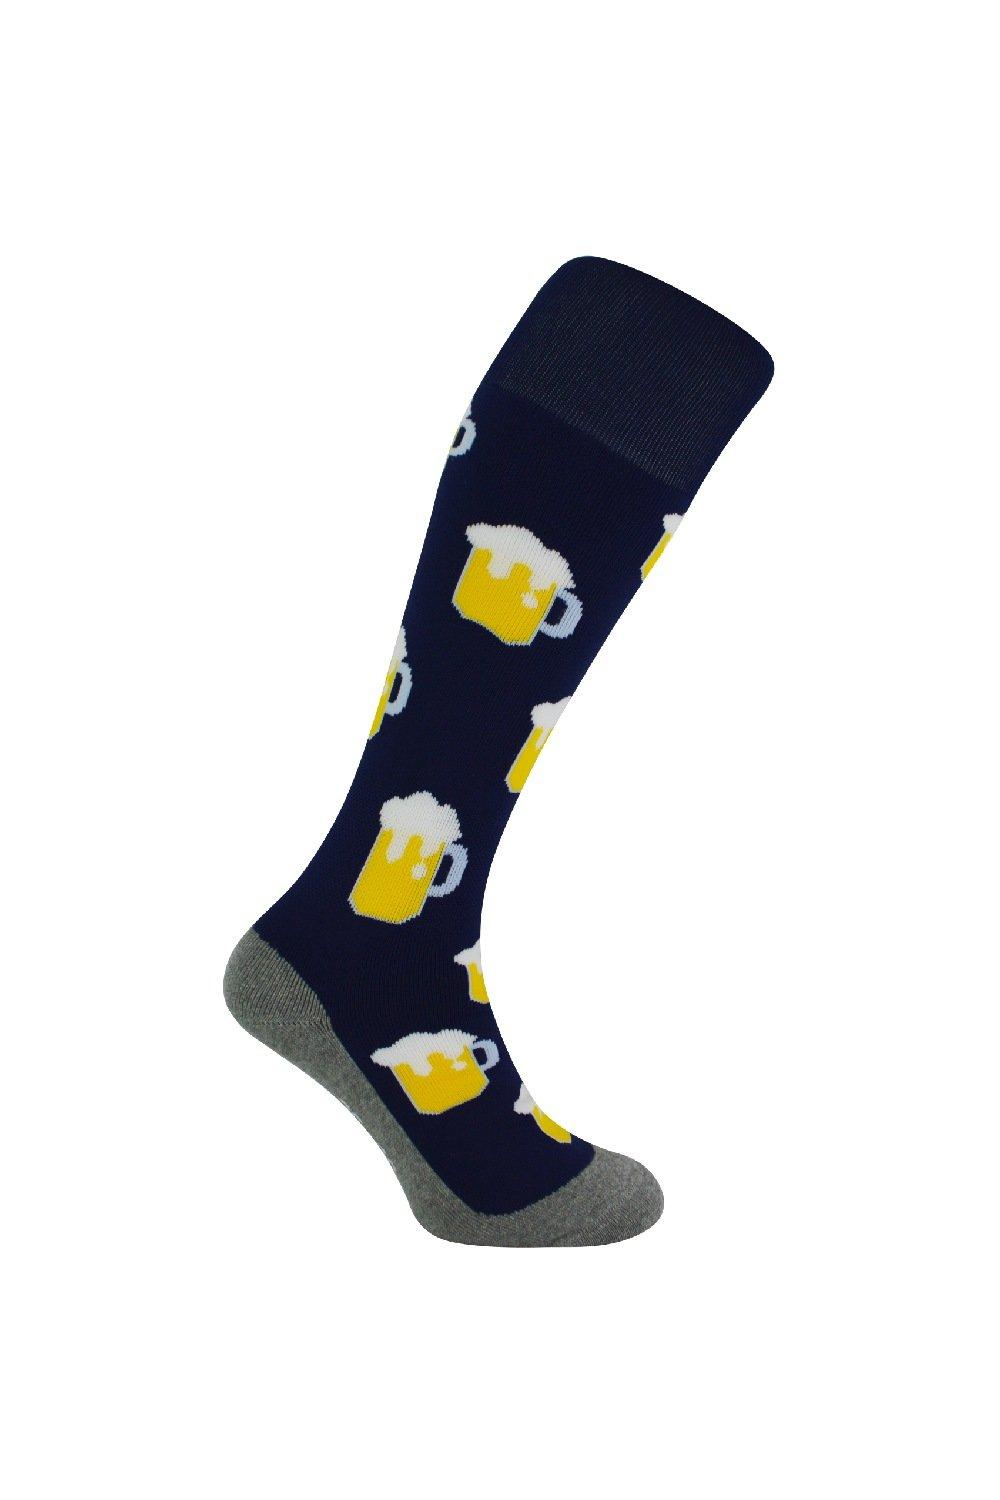 Long Sport Hockey Socks with Colourful Cool Funky Designs